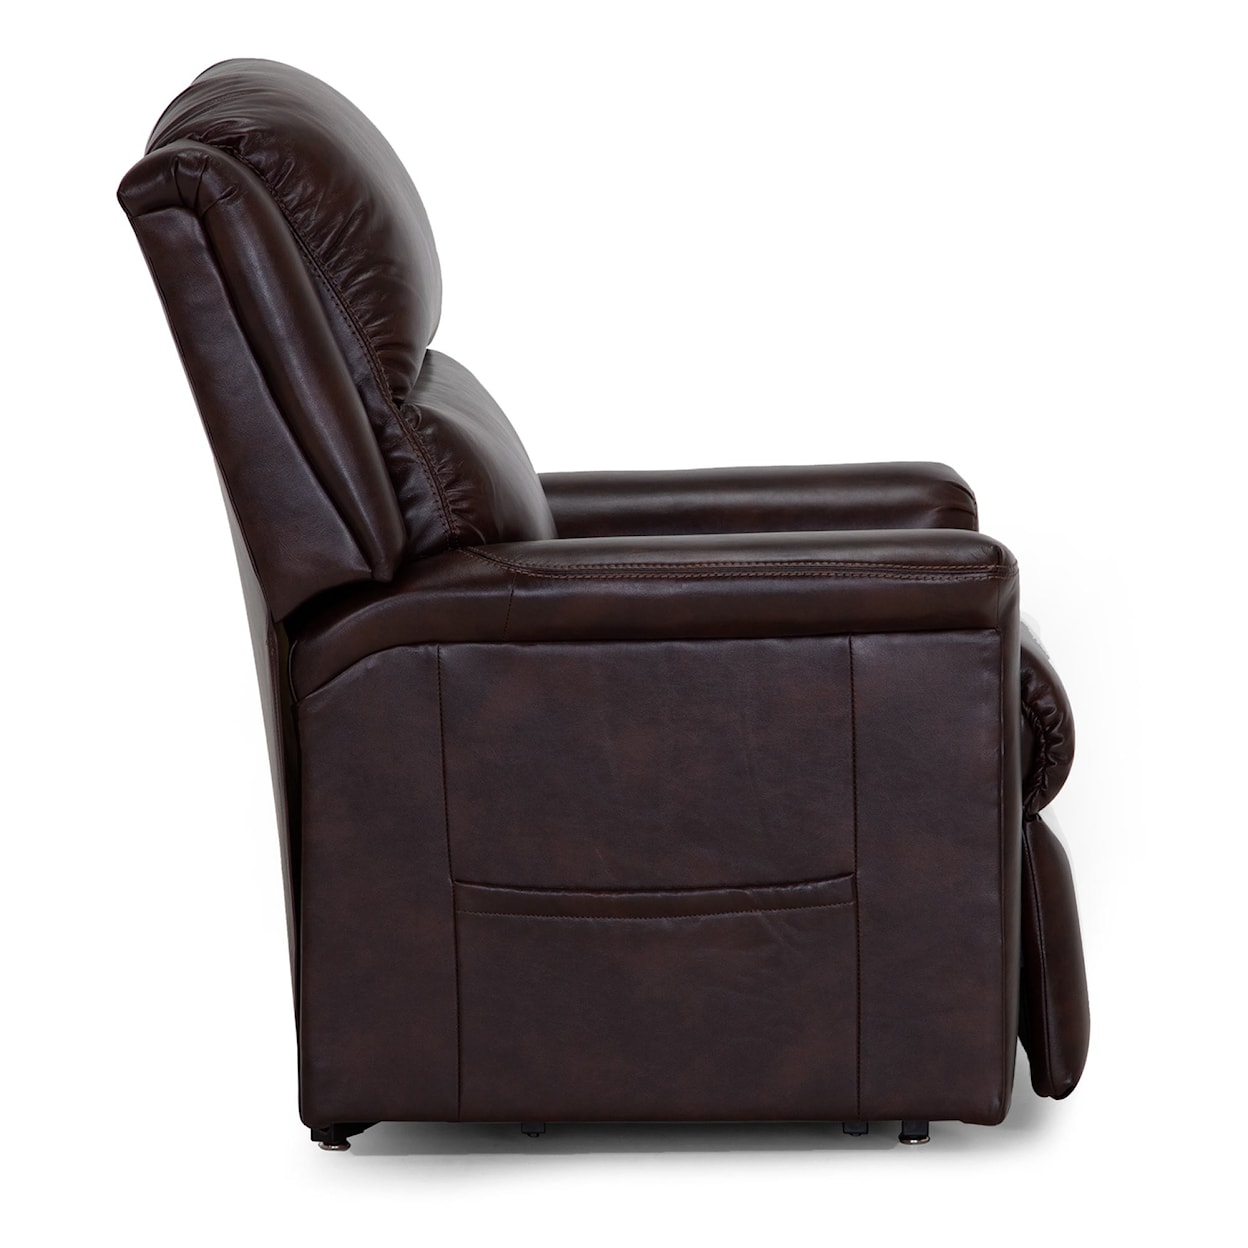 Franklin 486 Province Province Lift Chair